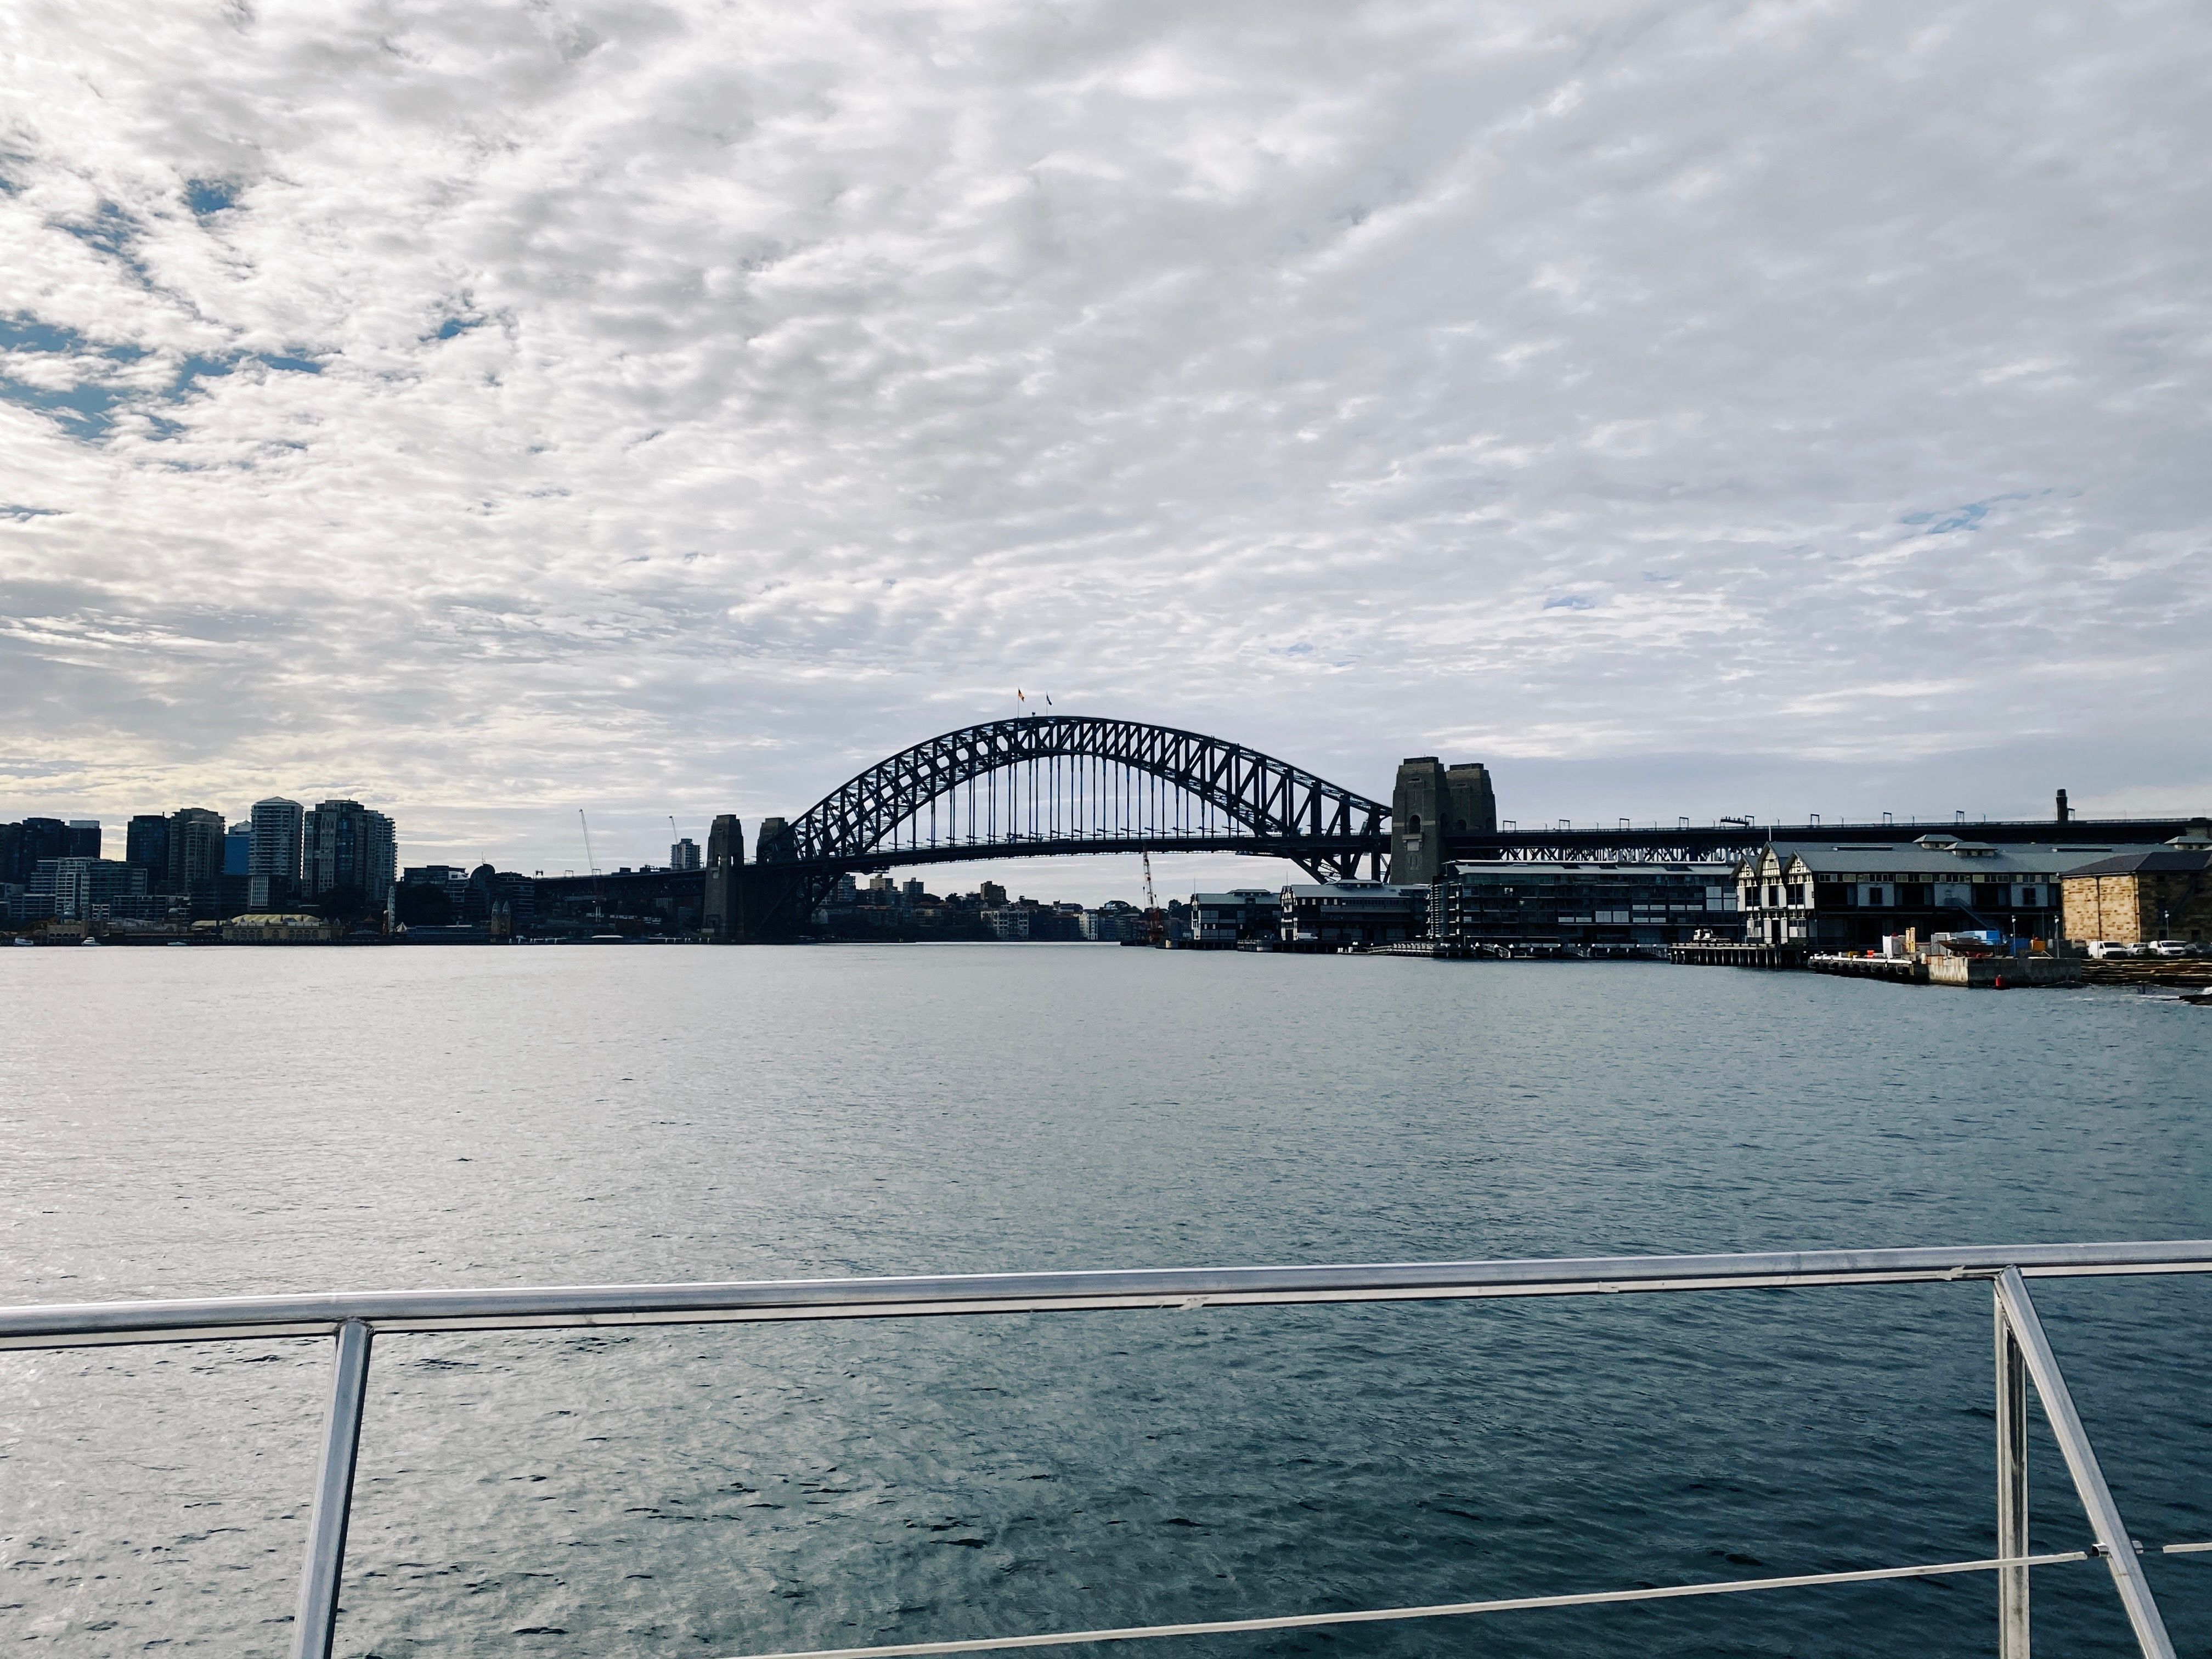 A photo of the Sydney Harbour Bridge taken from a boat. The sky is grey and mostly overcast.